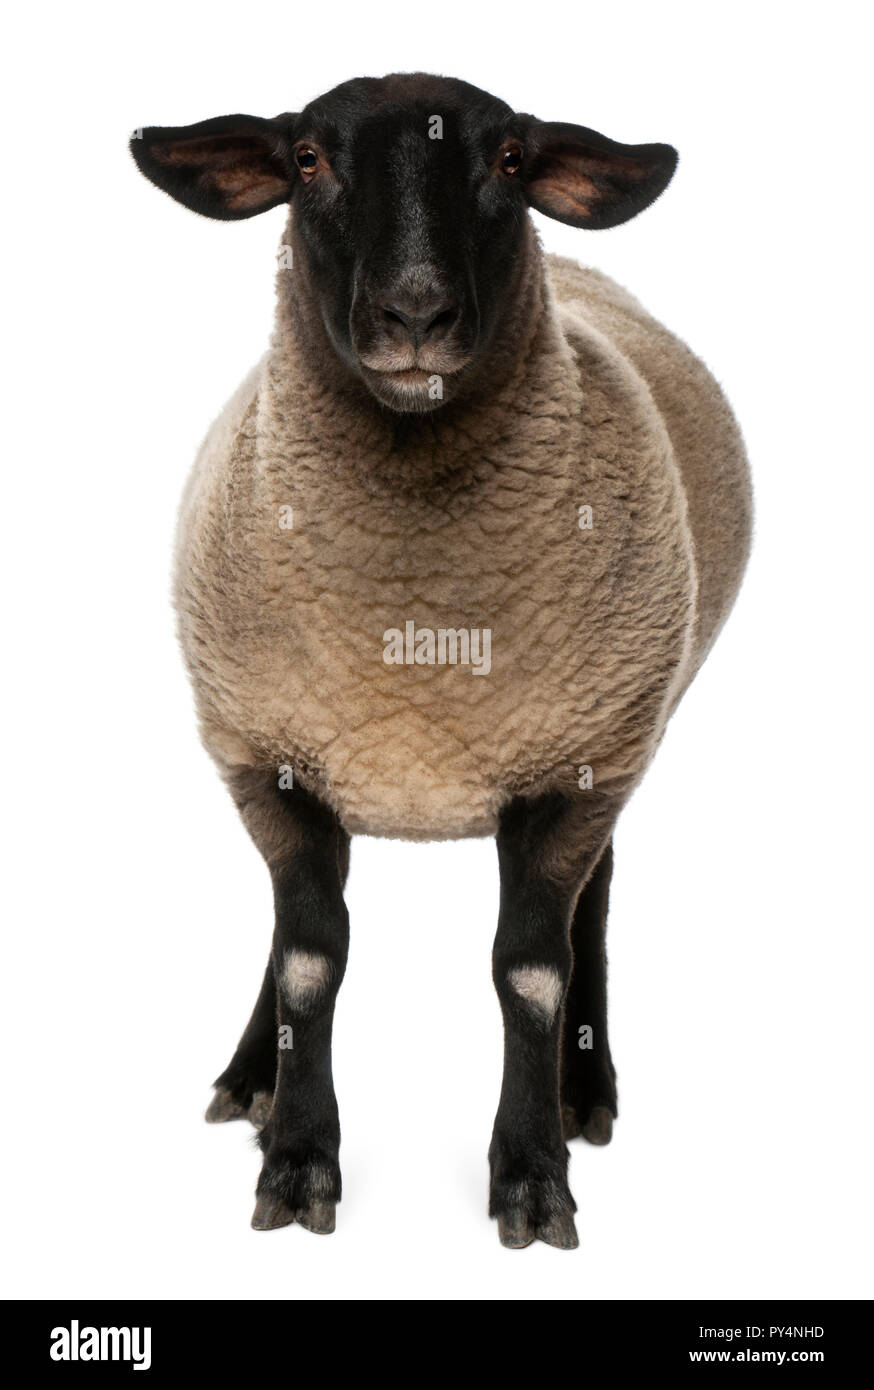 Female Suffolk sheep, Ovis aries, 2 years old, standing in front of white background Stock Photo